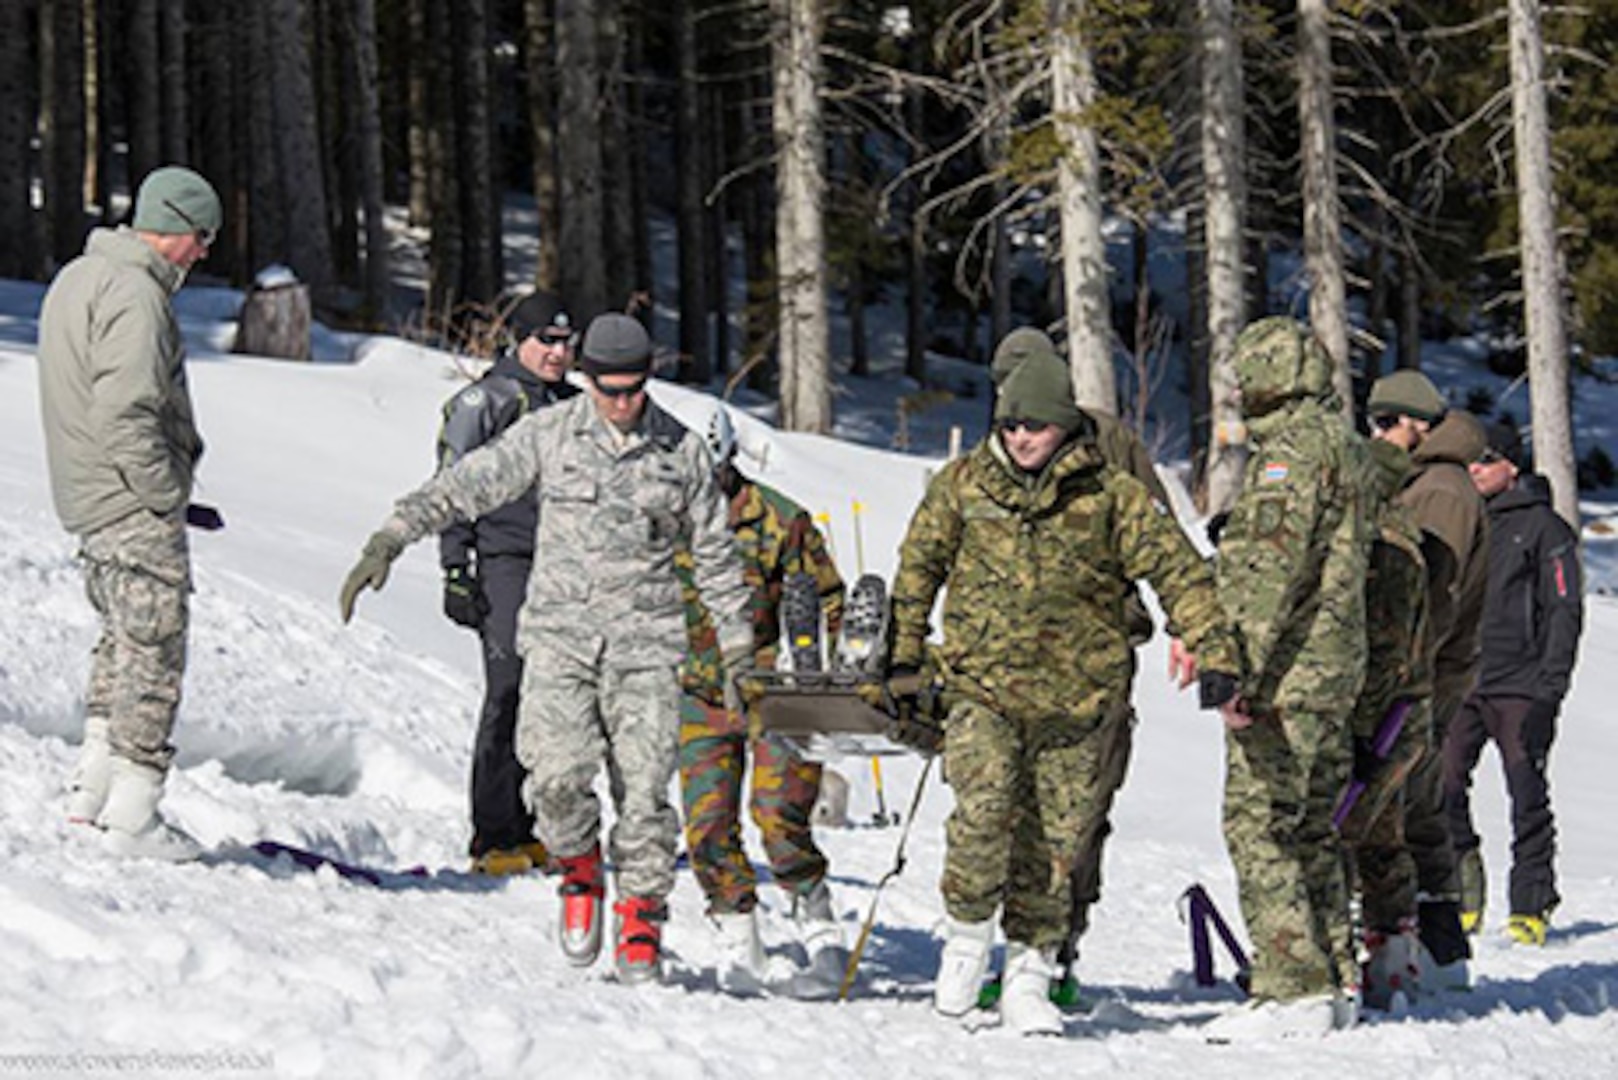 ​Colorado National Guard Citizen-Soldiers and Citizen-Airmen participate in the 10th anniversary NATO Non-Commissioned Officer Winter Camp in the mountains of Slovenia, March 3-10, 2017. The Colorado-Slovenia partnership is part of the National Guard’s State Partnership Program.